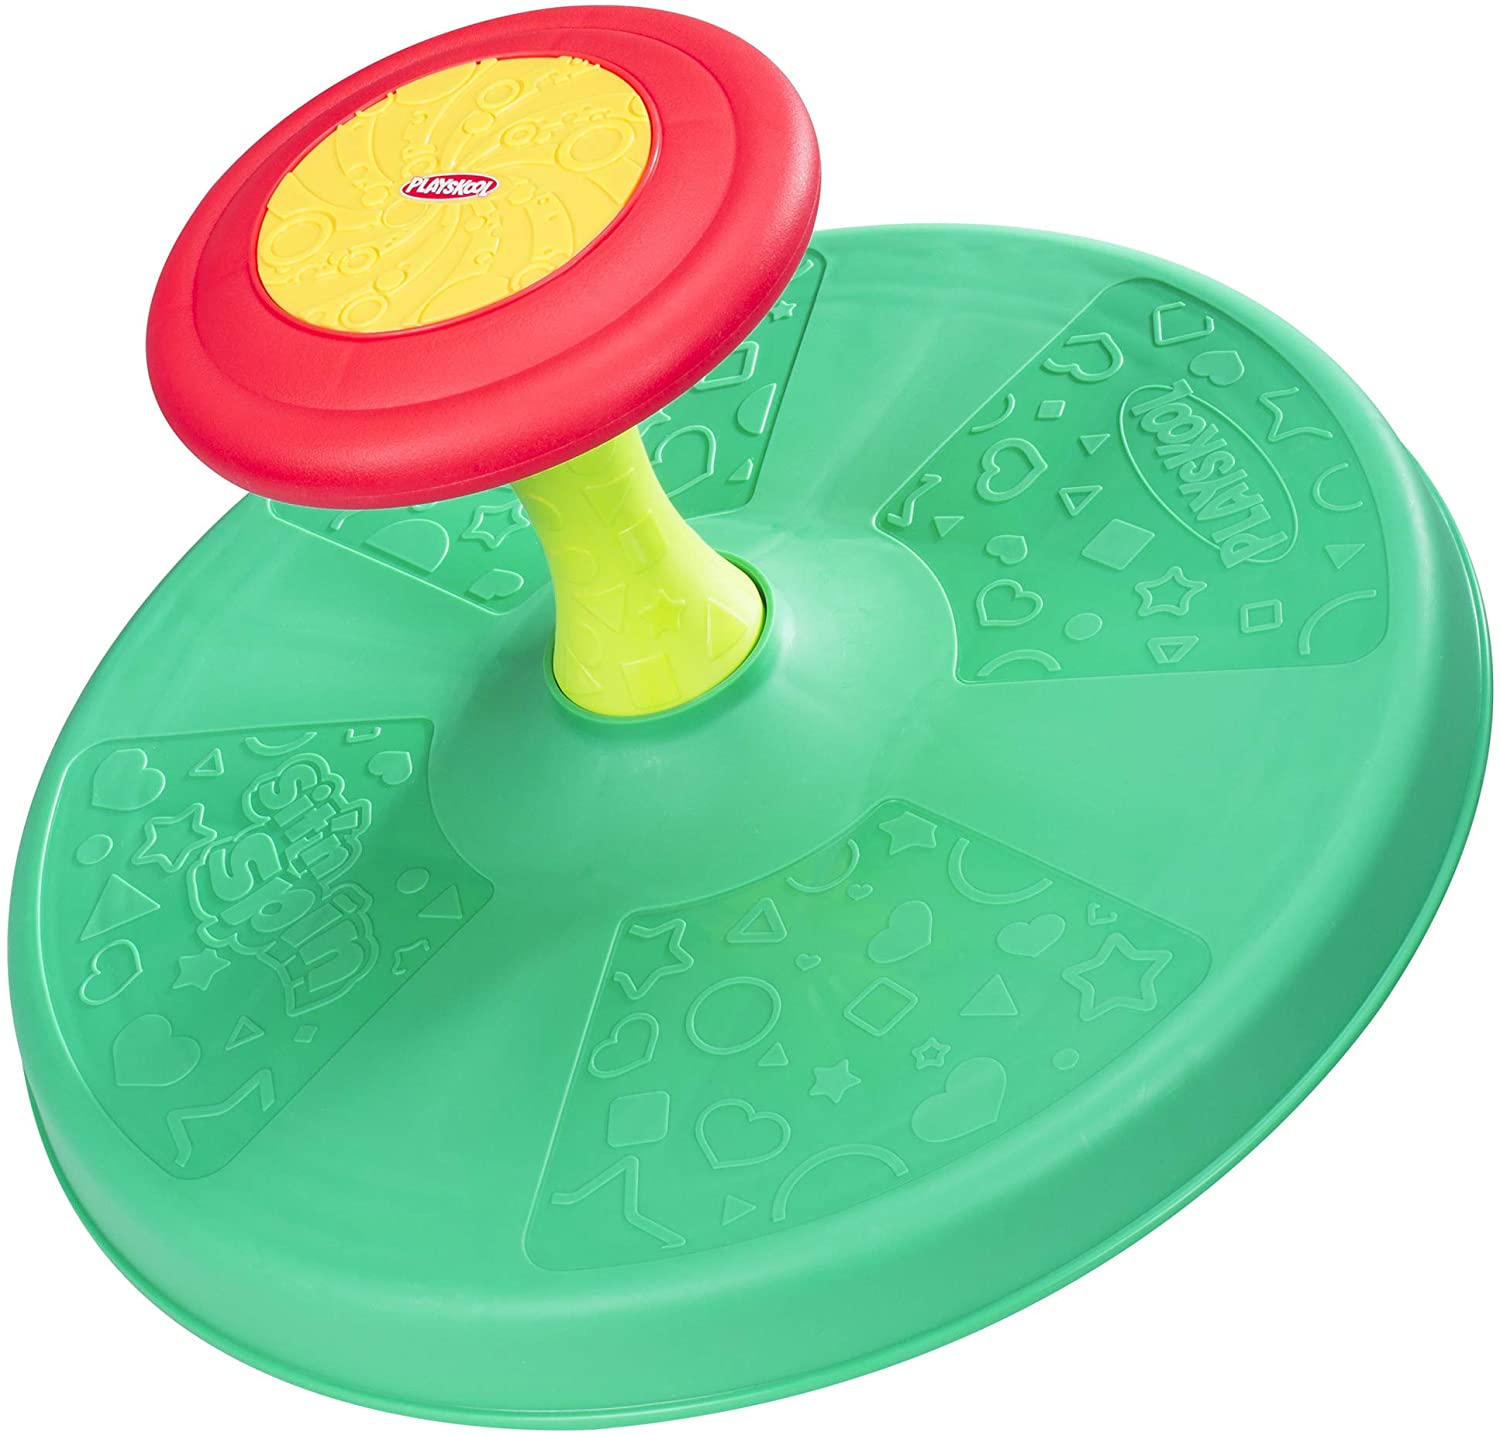 Playskool Sit n Spin Classic Spinning Activity Toy for Toddlers Ages Over 18 Months - image 1 of 5